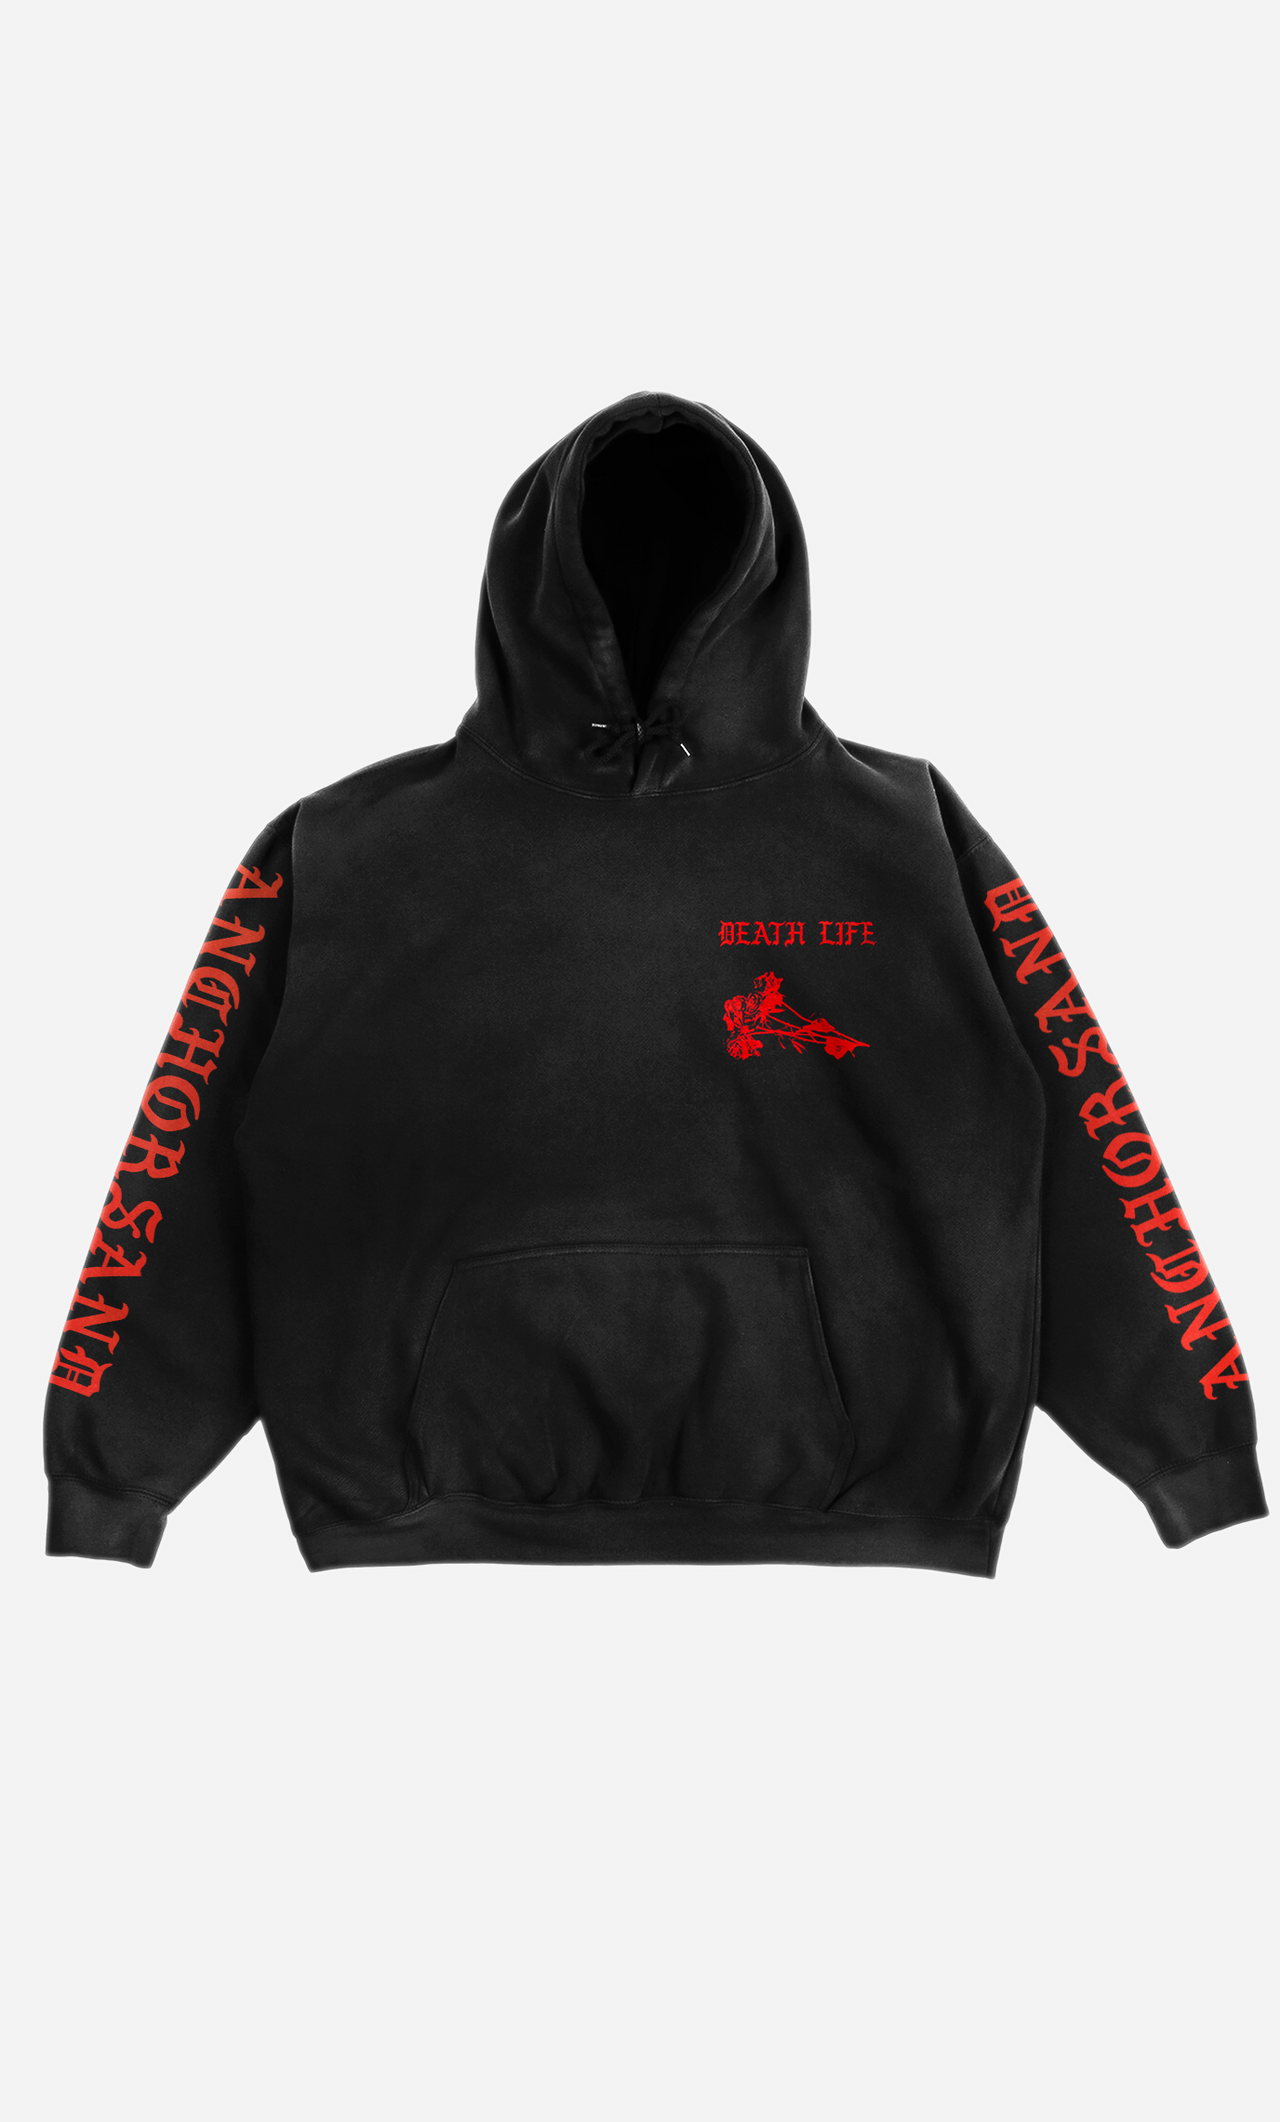 LIFE AFTER DEATH PULLOVER